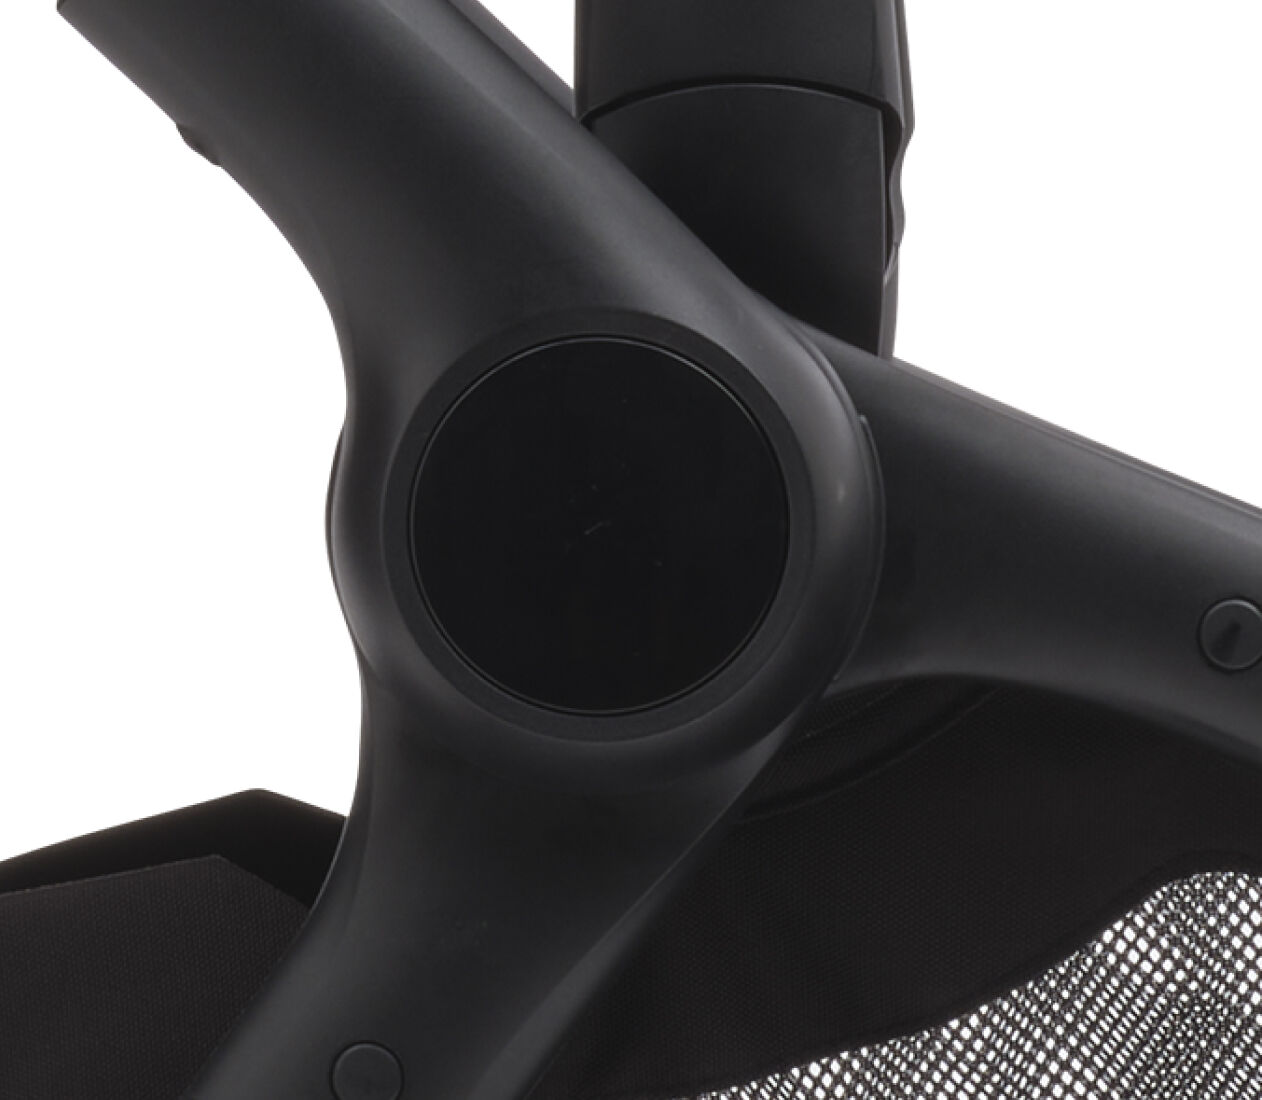  Close up on a Bugaboo stroller's chassis with a sleek finish and a matte, black central button.